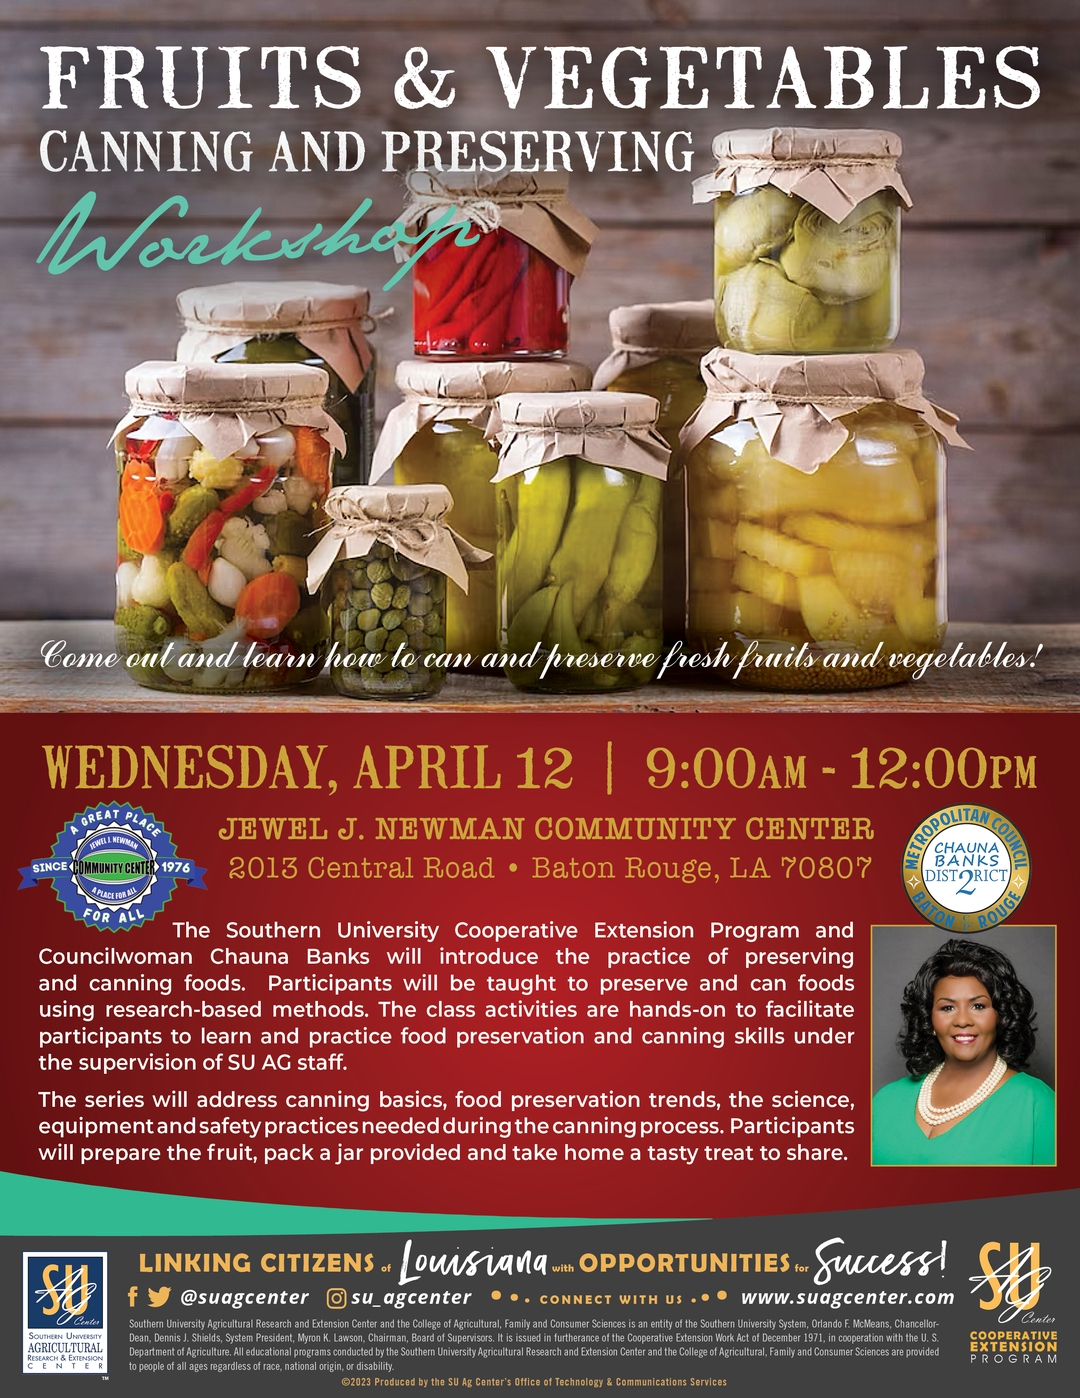 Canning and preserving workshop